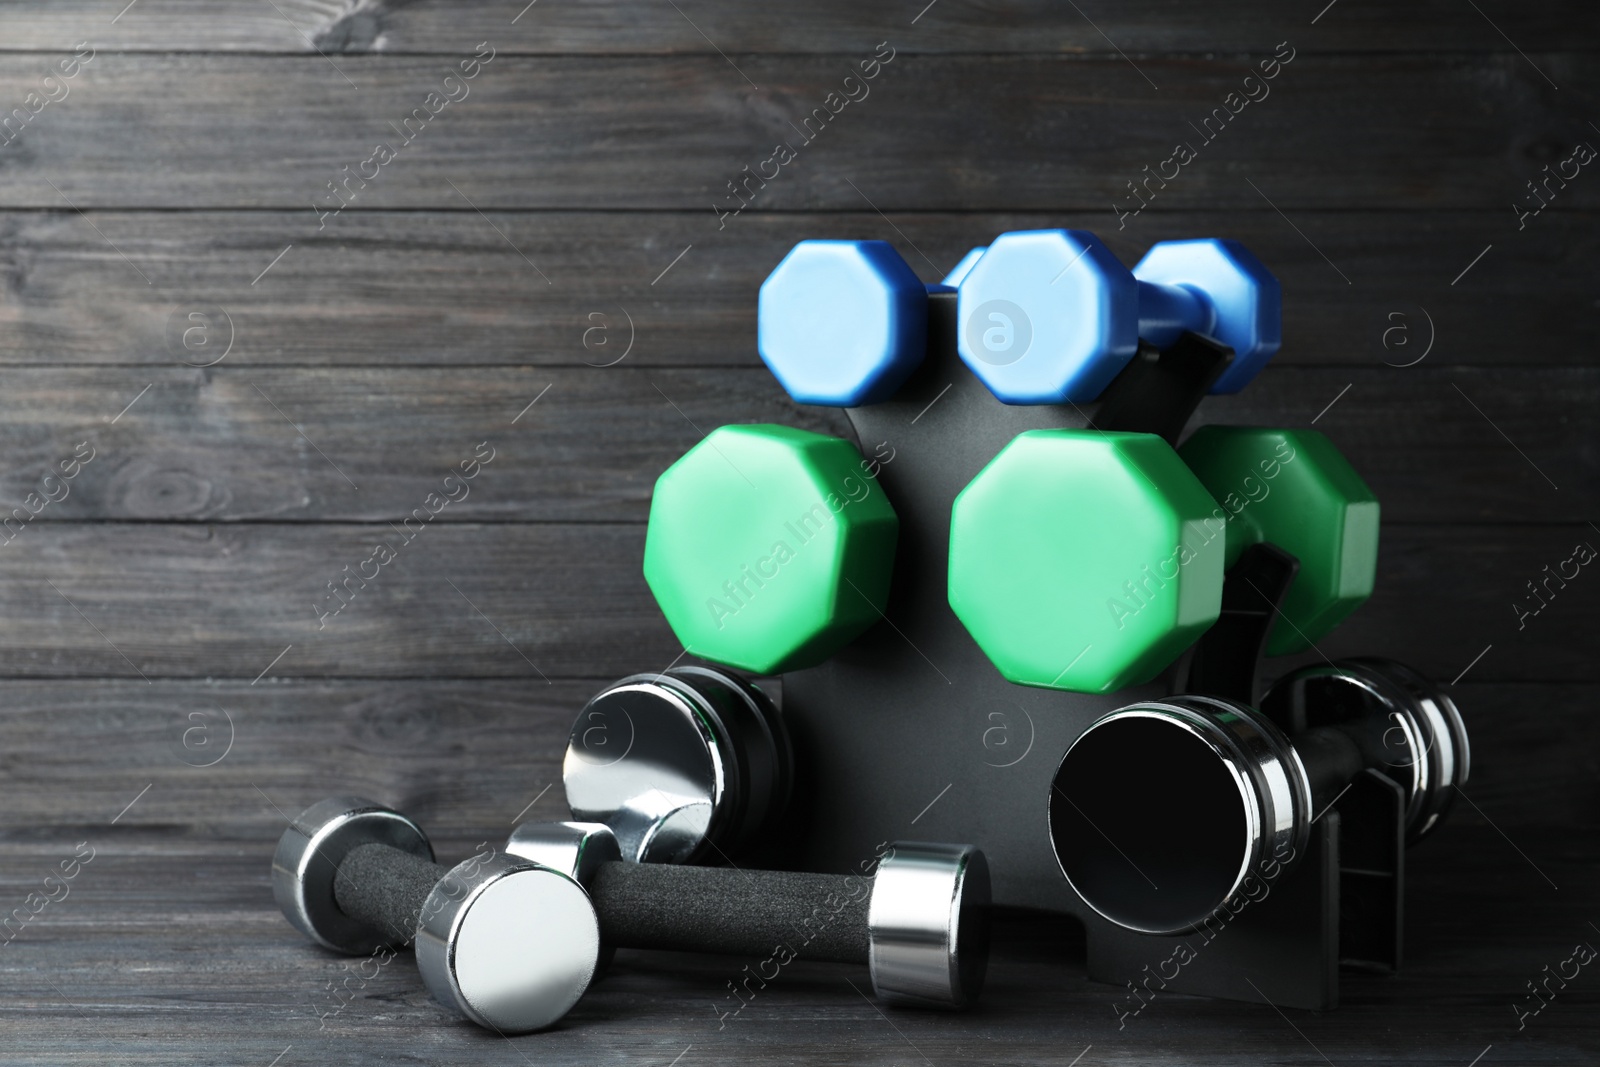 Photo of Rack with different dumbbells on black wooden background. Space for text